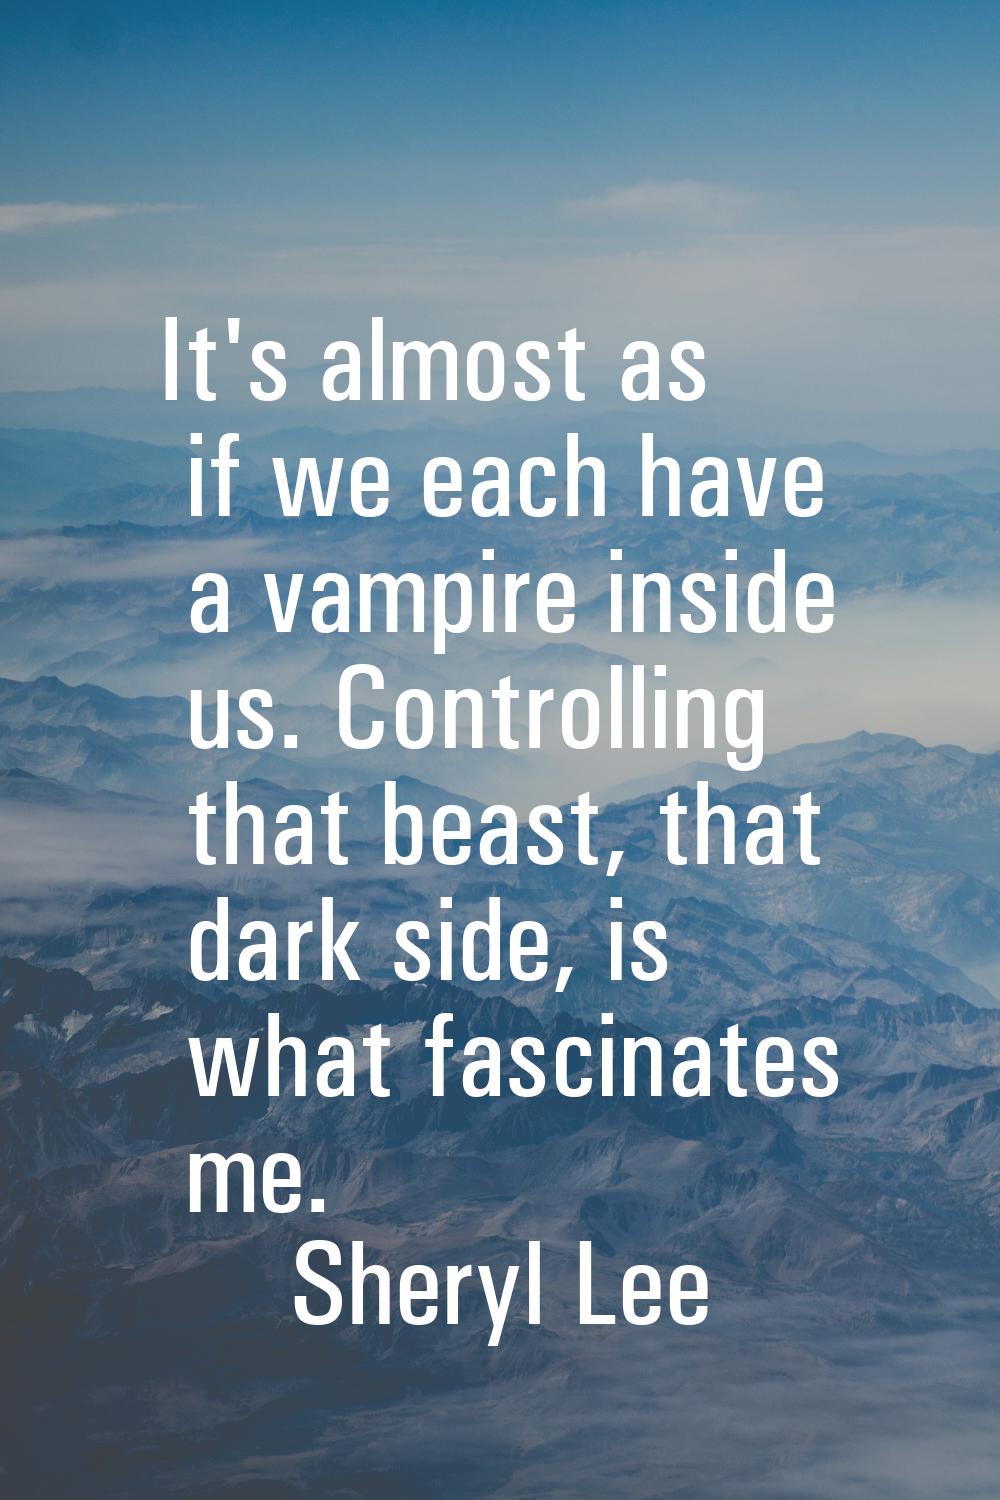 It's almost as if we each have a vampire inside us. Controlling that beast, that dark side, is what